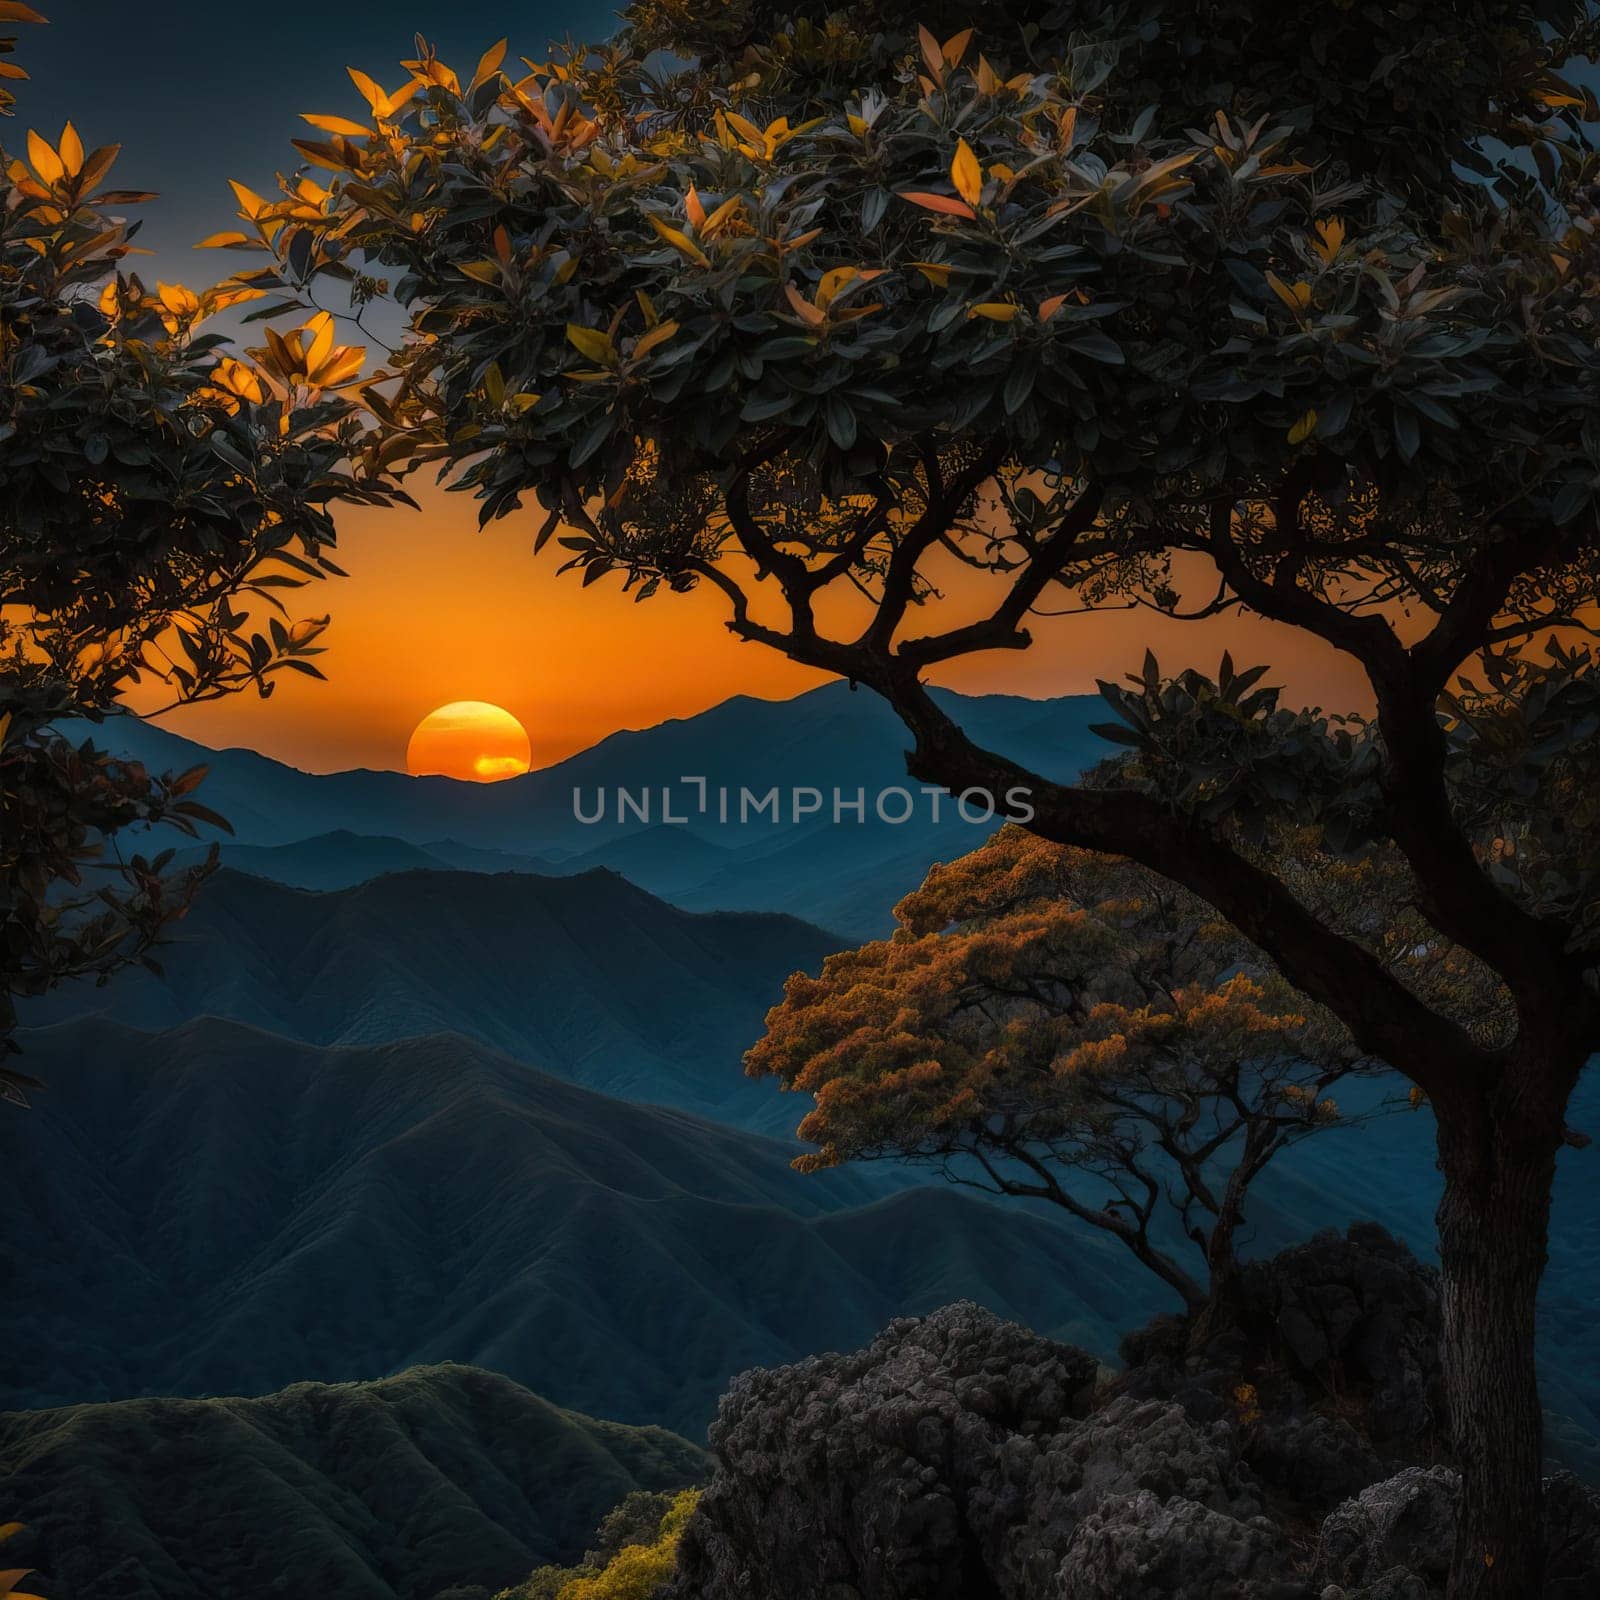 Moonlit night in the mountains by applesstock